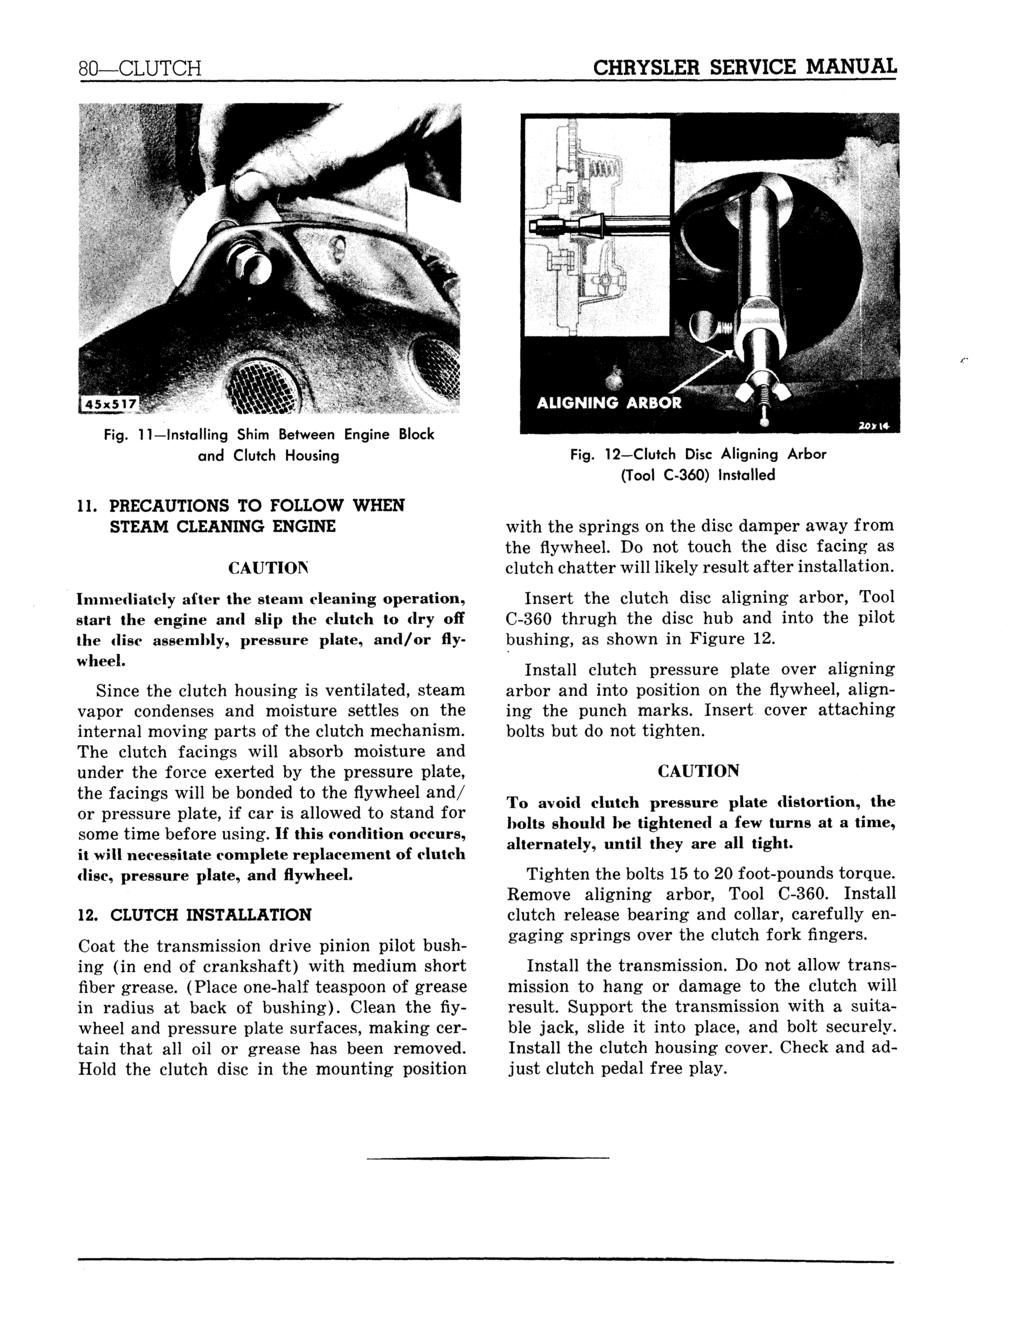 80 CLUTCH CHRYSLER SERVICE MANUAL Fig. 11 Installing Shim Between Engine Block and Clutch Housing Fig. 12 Clutch Disc Aligning Arbor (Tool C-360) Installed 11.